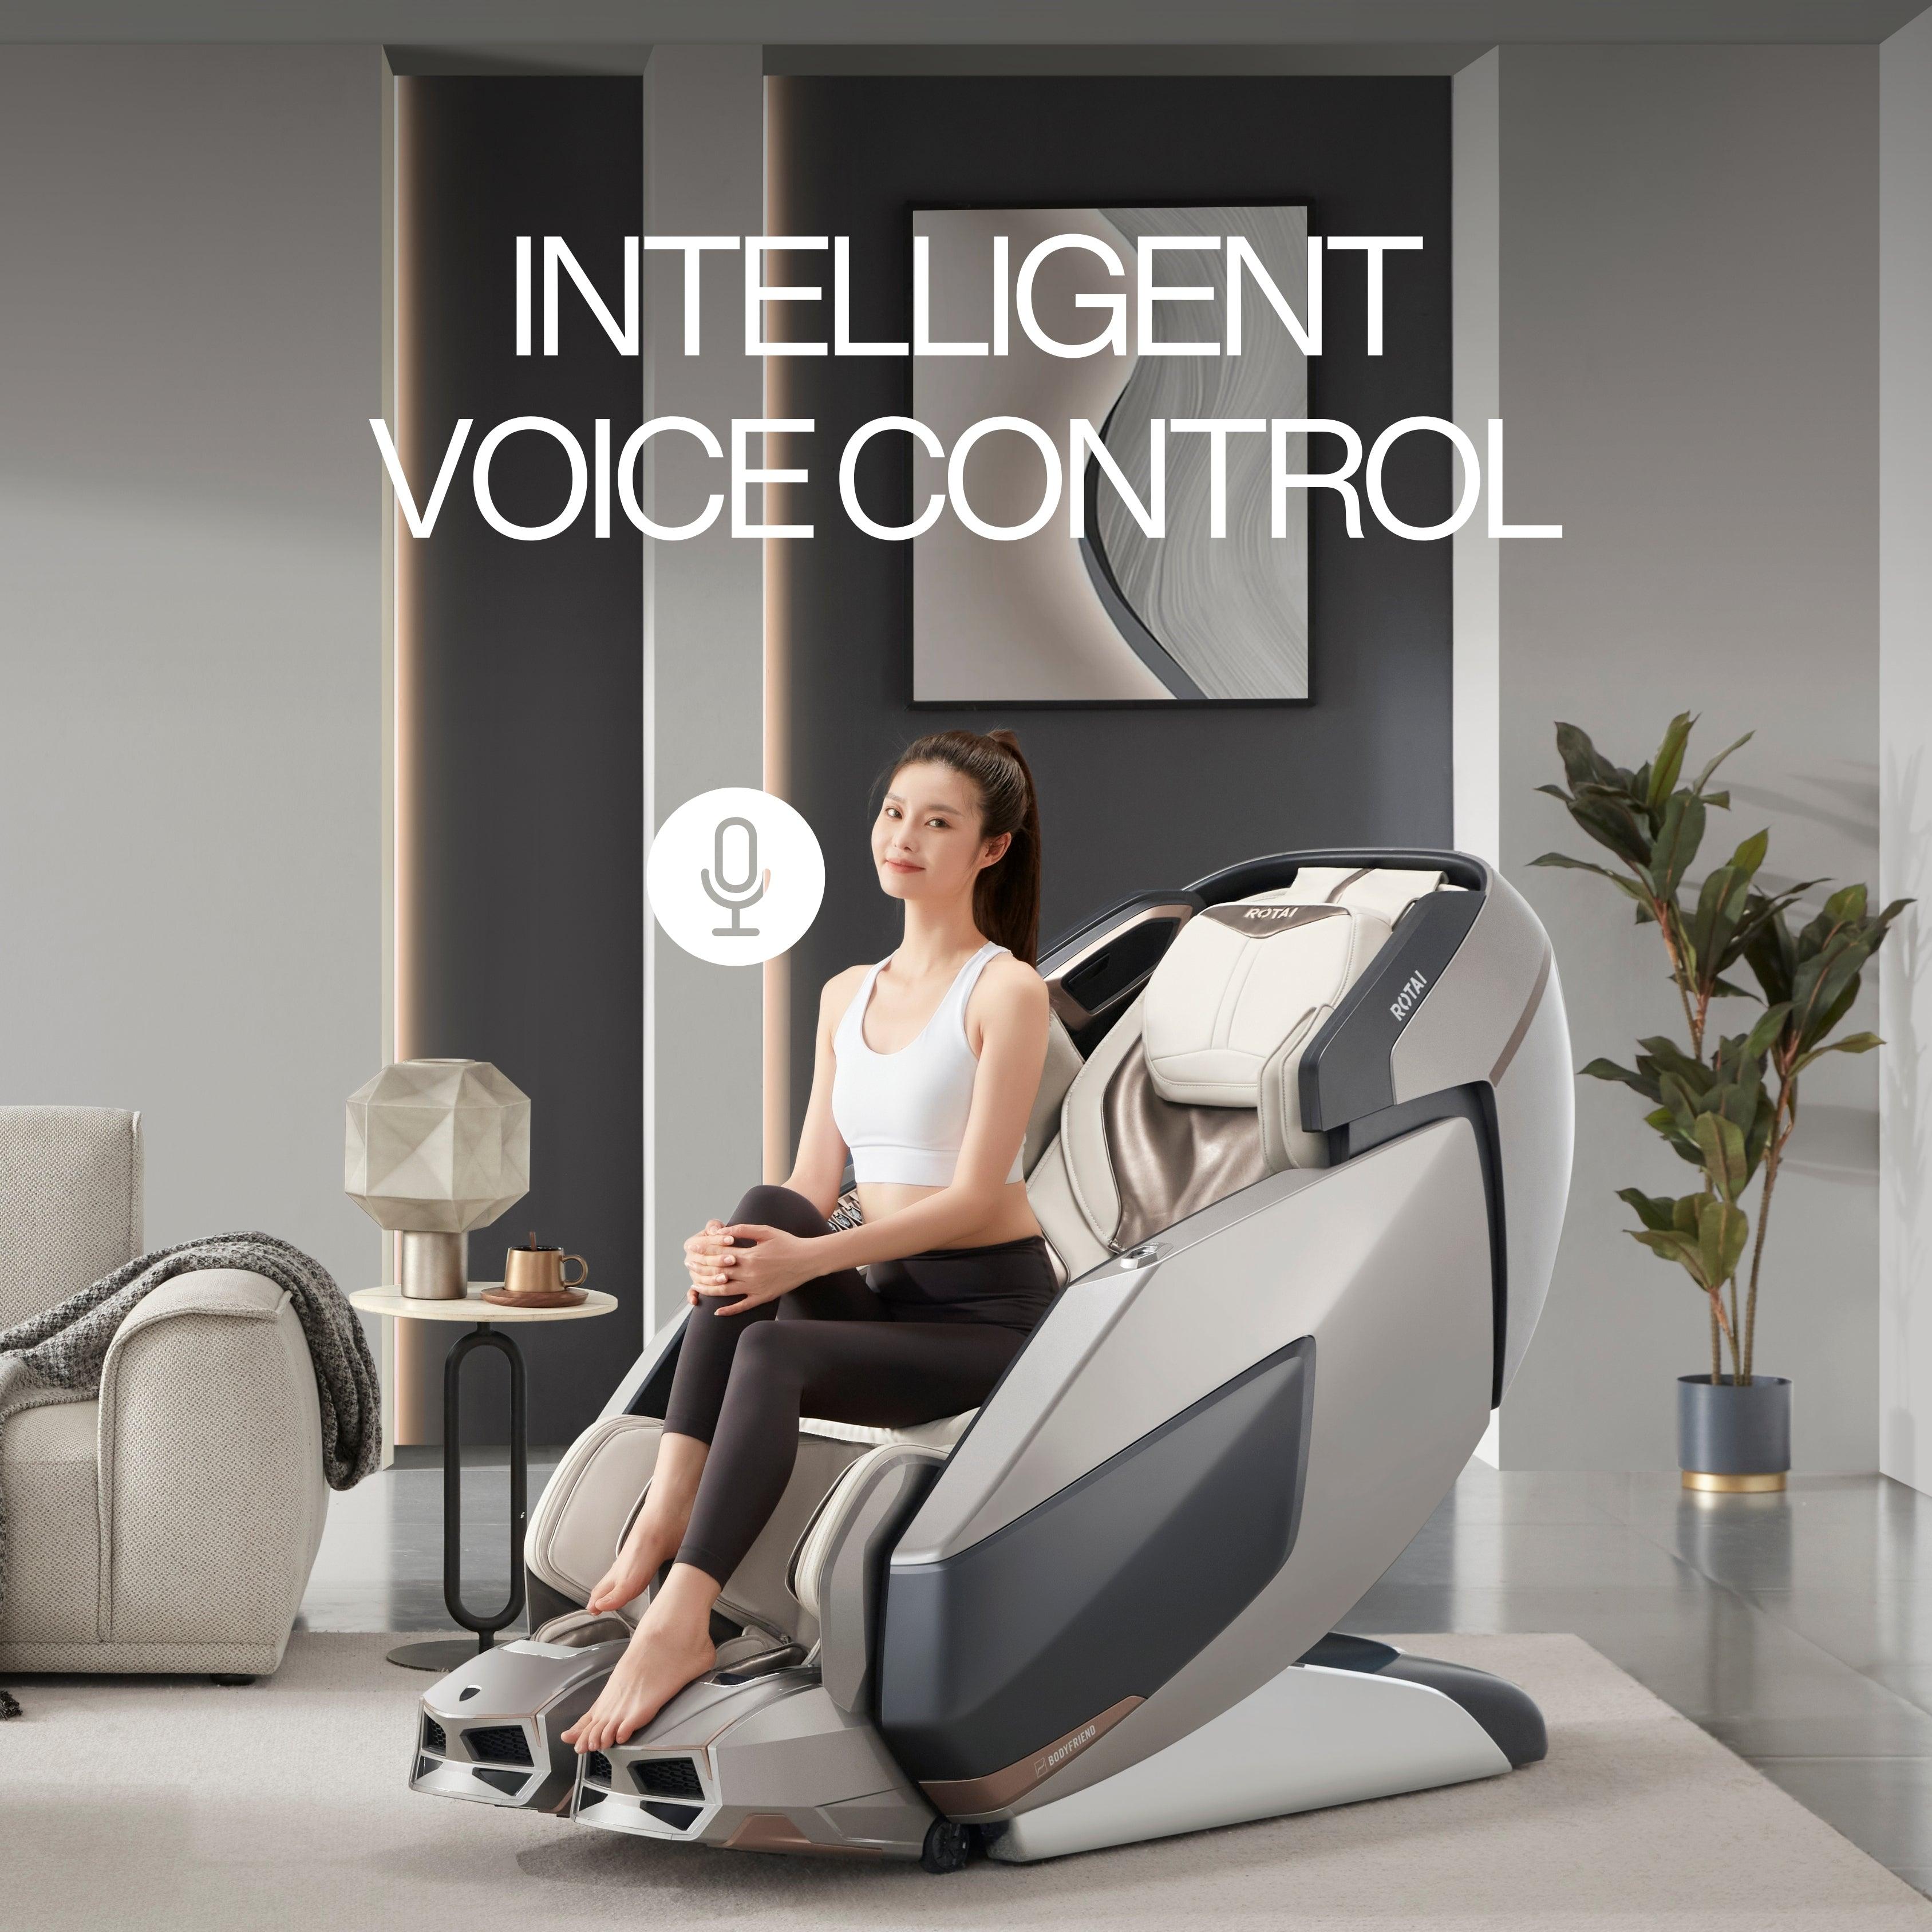 Woman enjoying AI Robotic Massage Chair (Glacier Silver) with intelligent voice control in a modern living room.